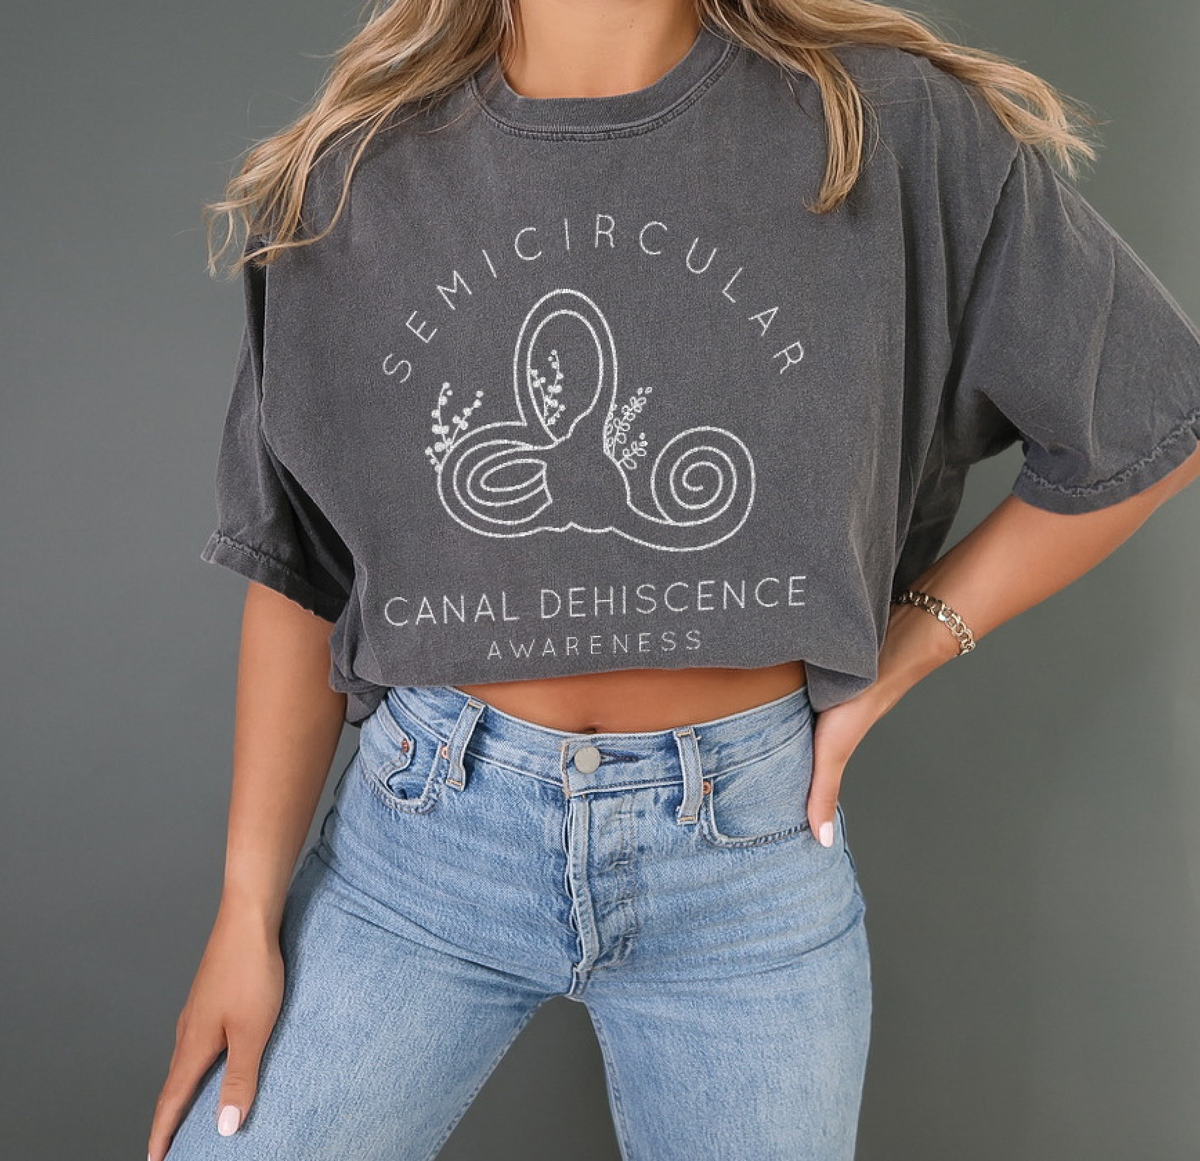 Semicircular Canal Dehiscence Comfort Colors Unisex Garment-Dyed T-shirt